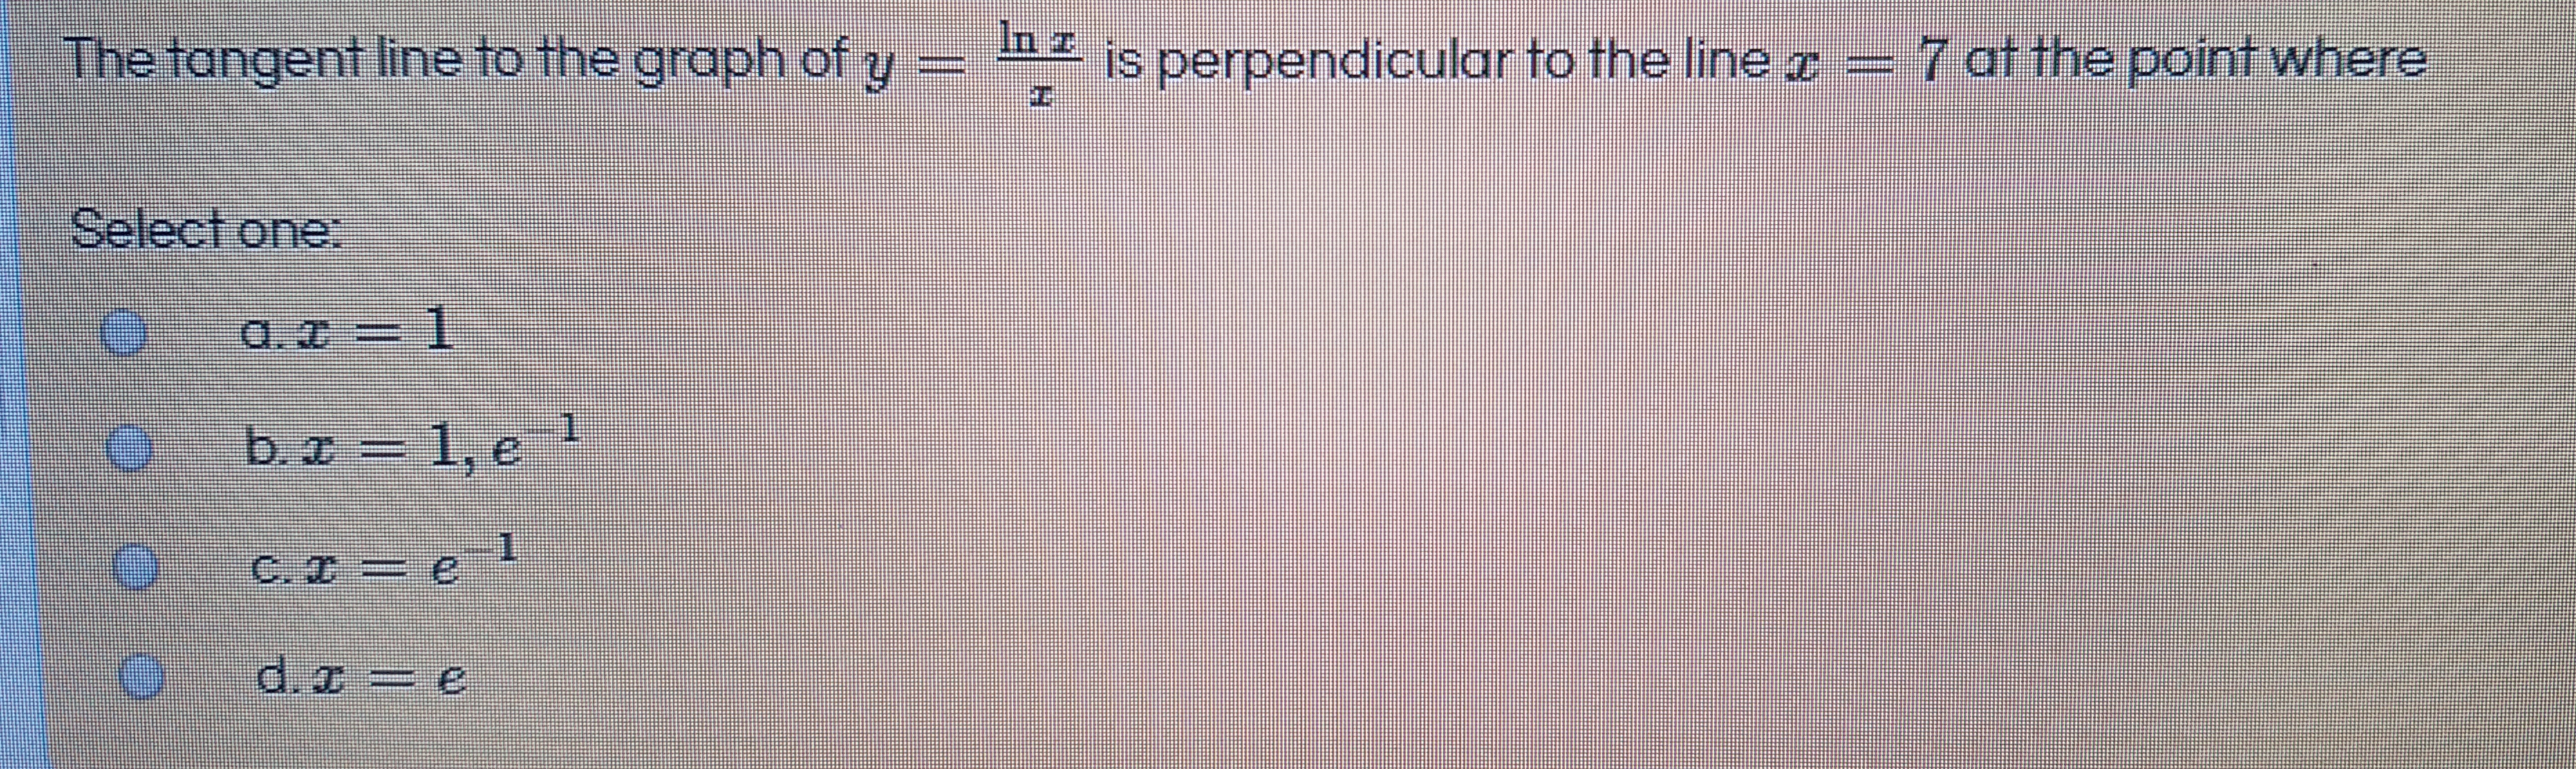 In z
The tangent line to the graph of y
is perpendicular to the line = 7 at the point where
